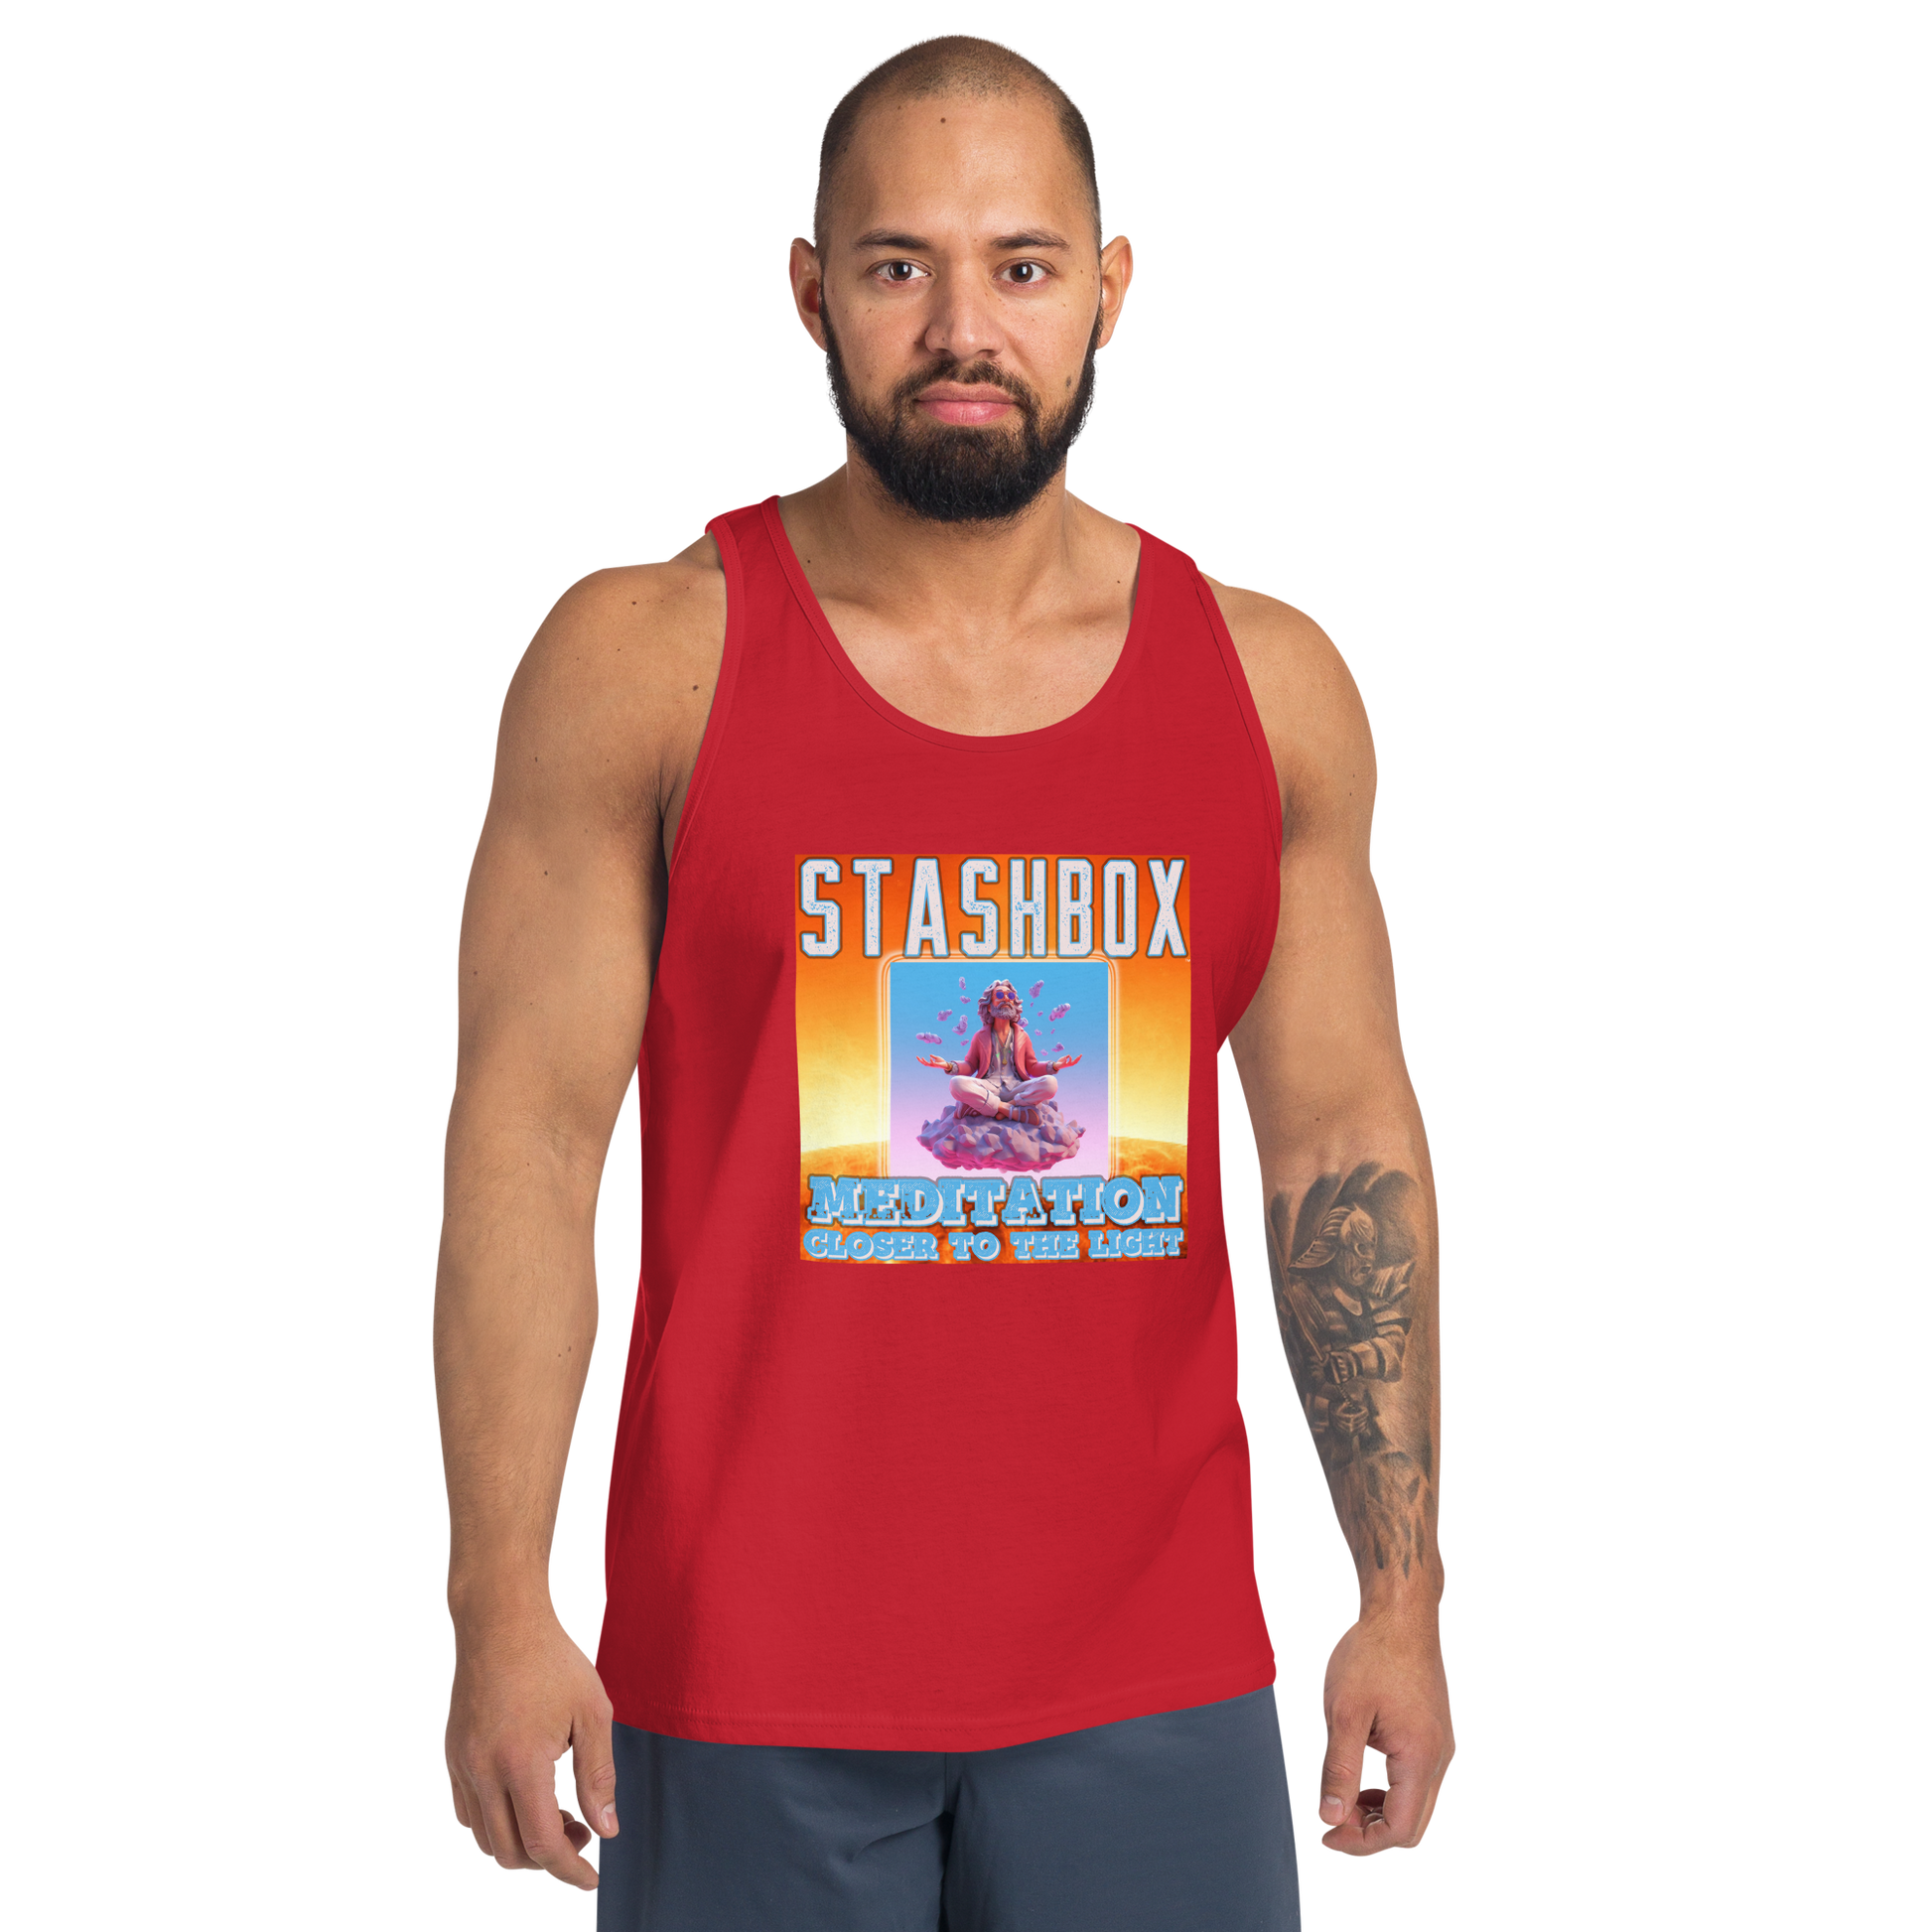 Discover serenity with our Meditation: Closer To the Light Men's Tanktop Shirt, Artwork #003 by Stashbox. Your wardrobe, your journey to mindfulness, exclusively at Stashbox.ai.